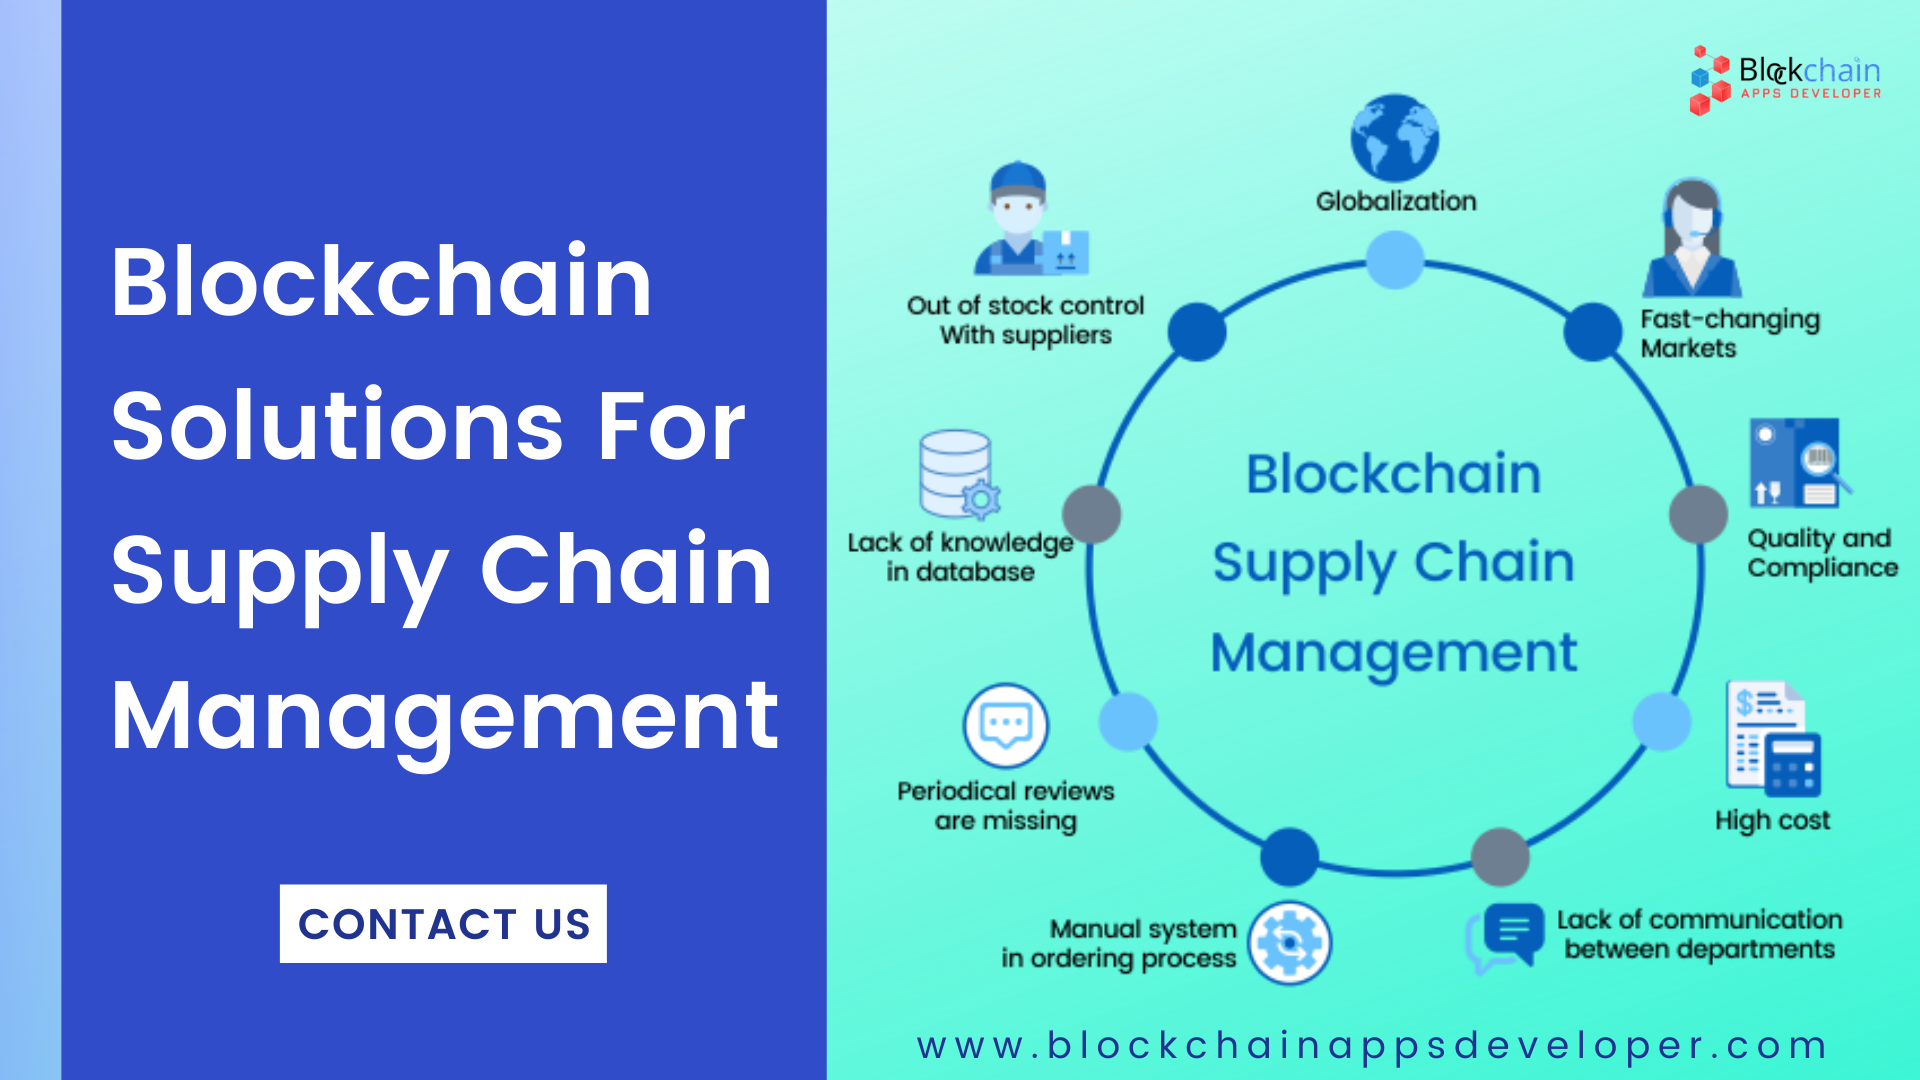 Blockchain Solutions for Supply Chain Management | Blockchain in Supply Chain | BlockchainAppsDeveloper